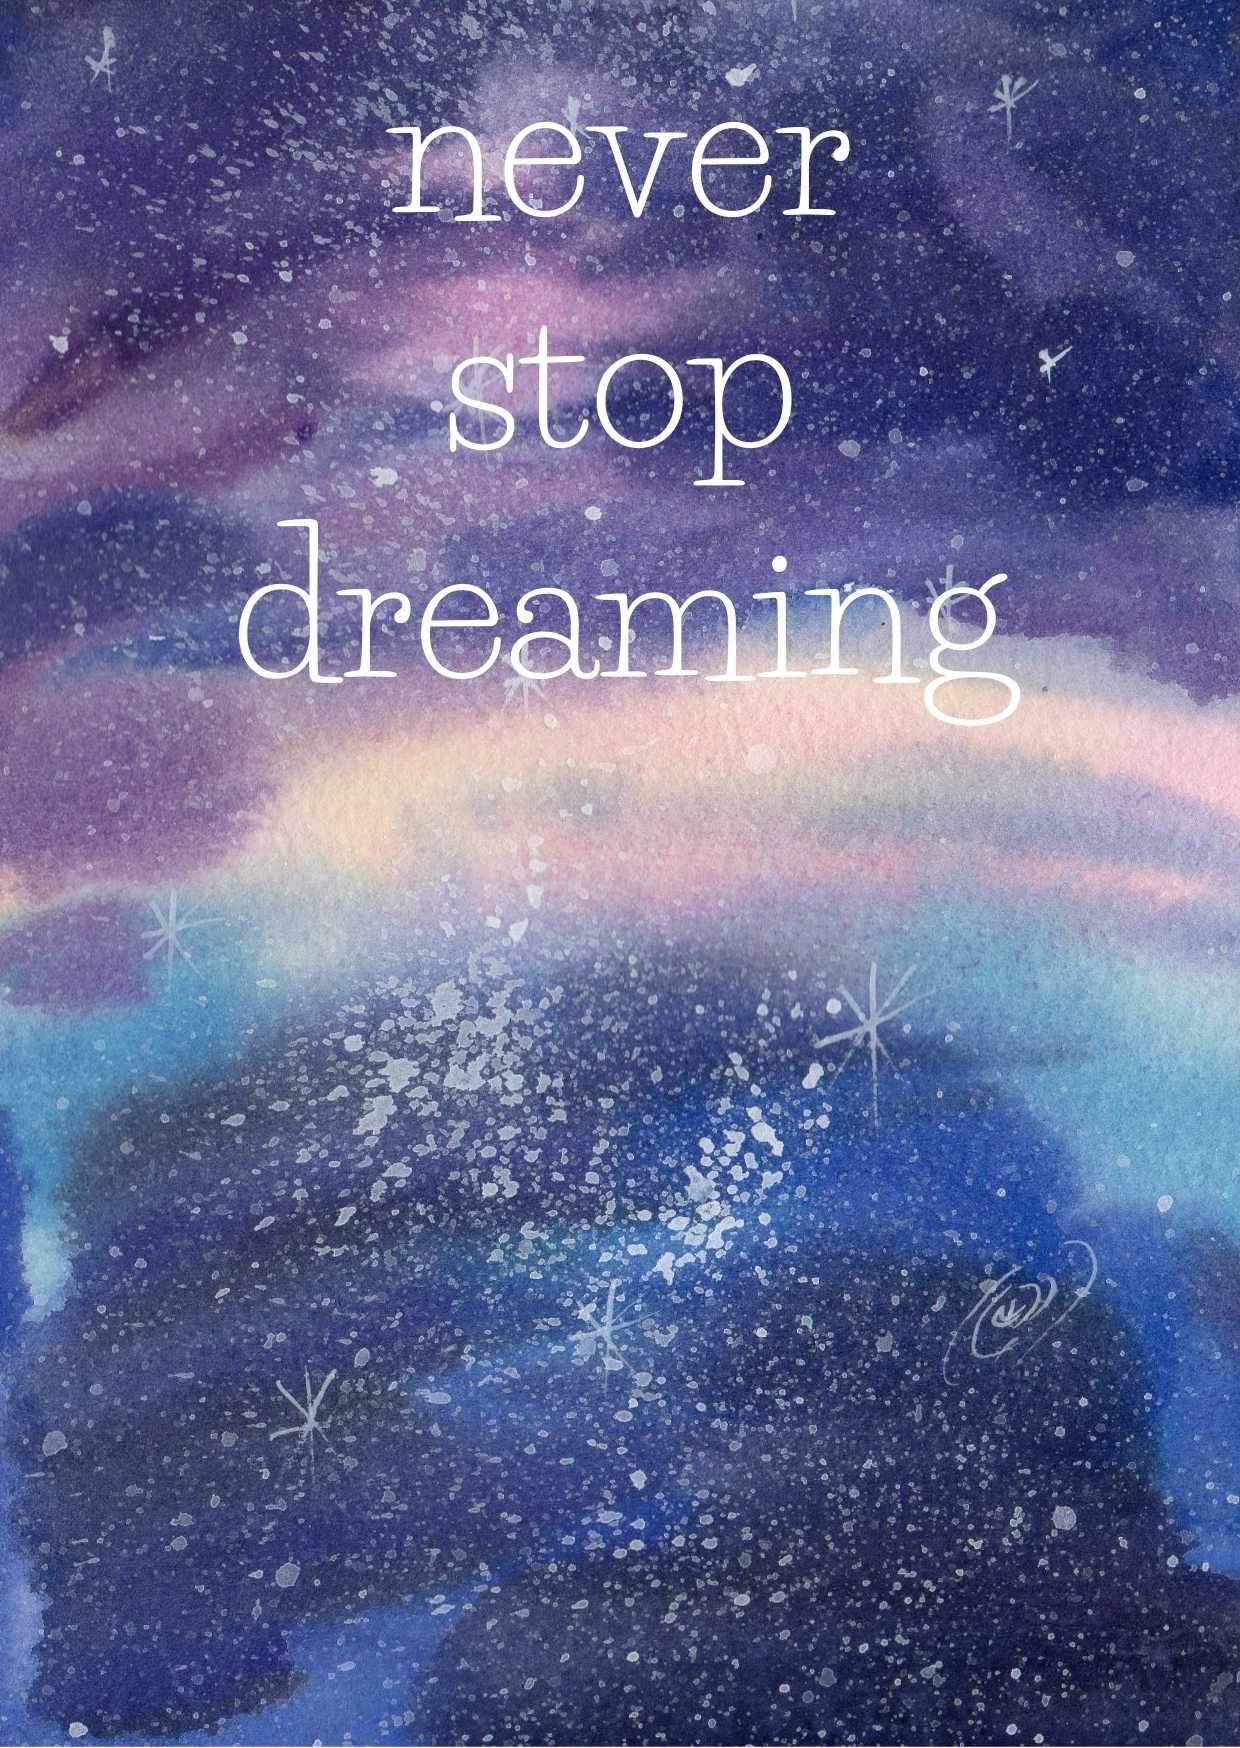 Never stop dreaming | Fripperies